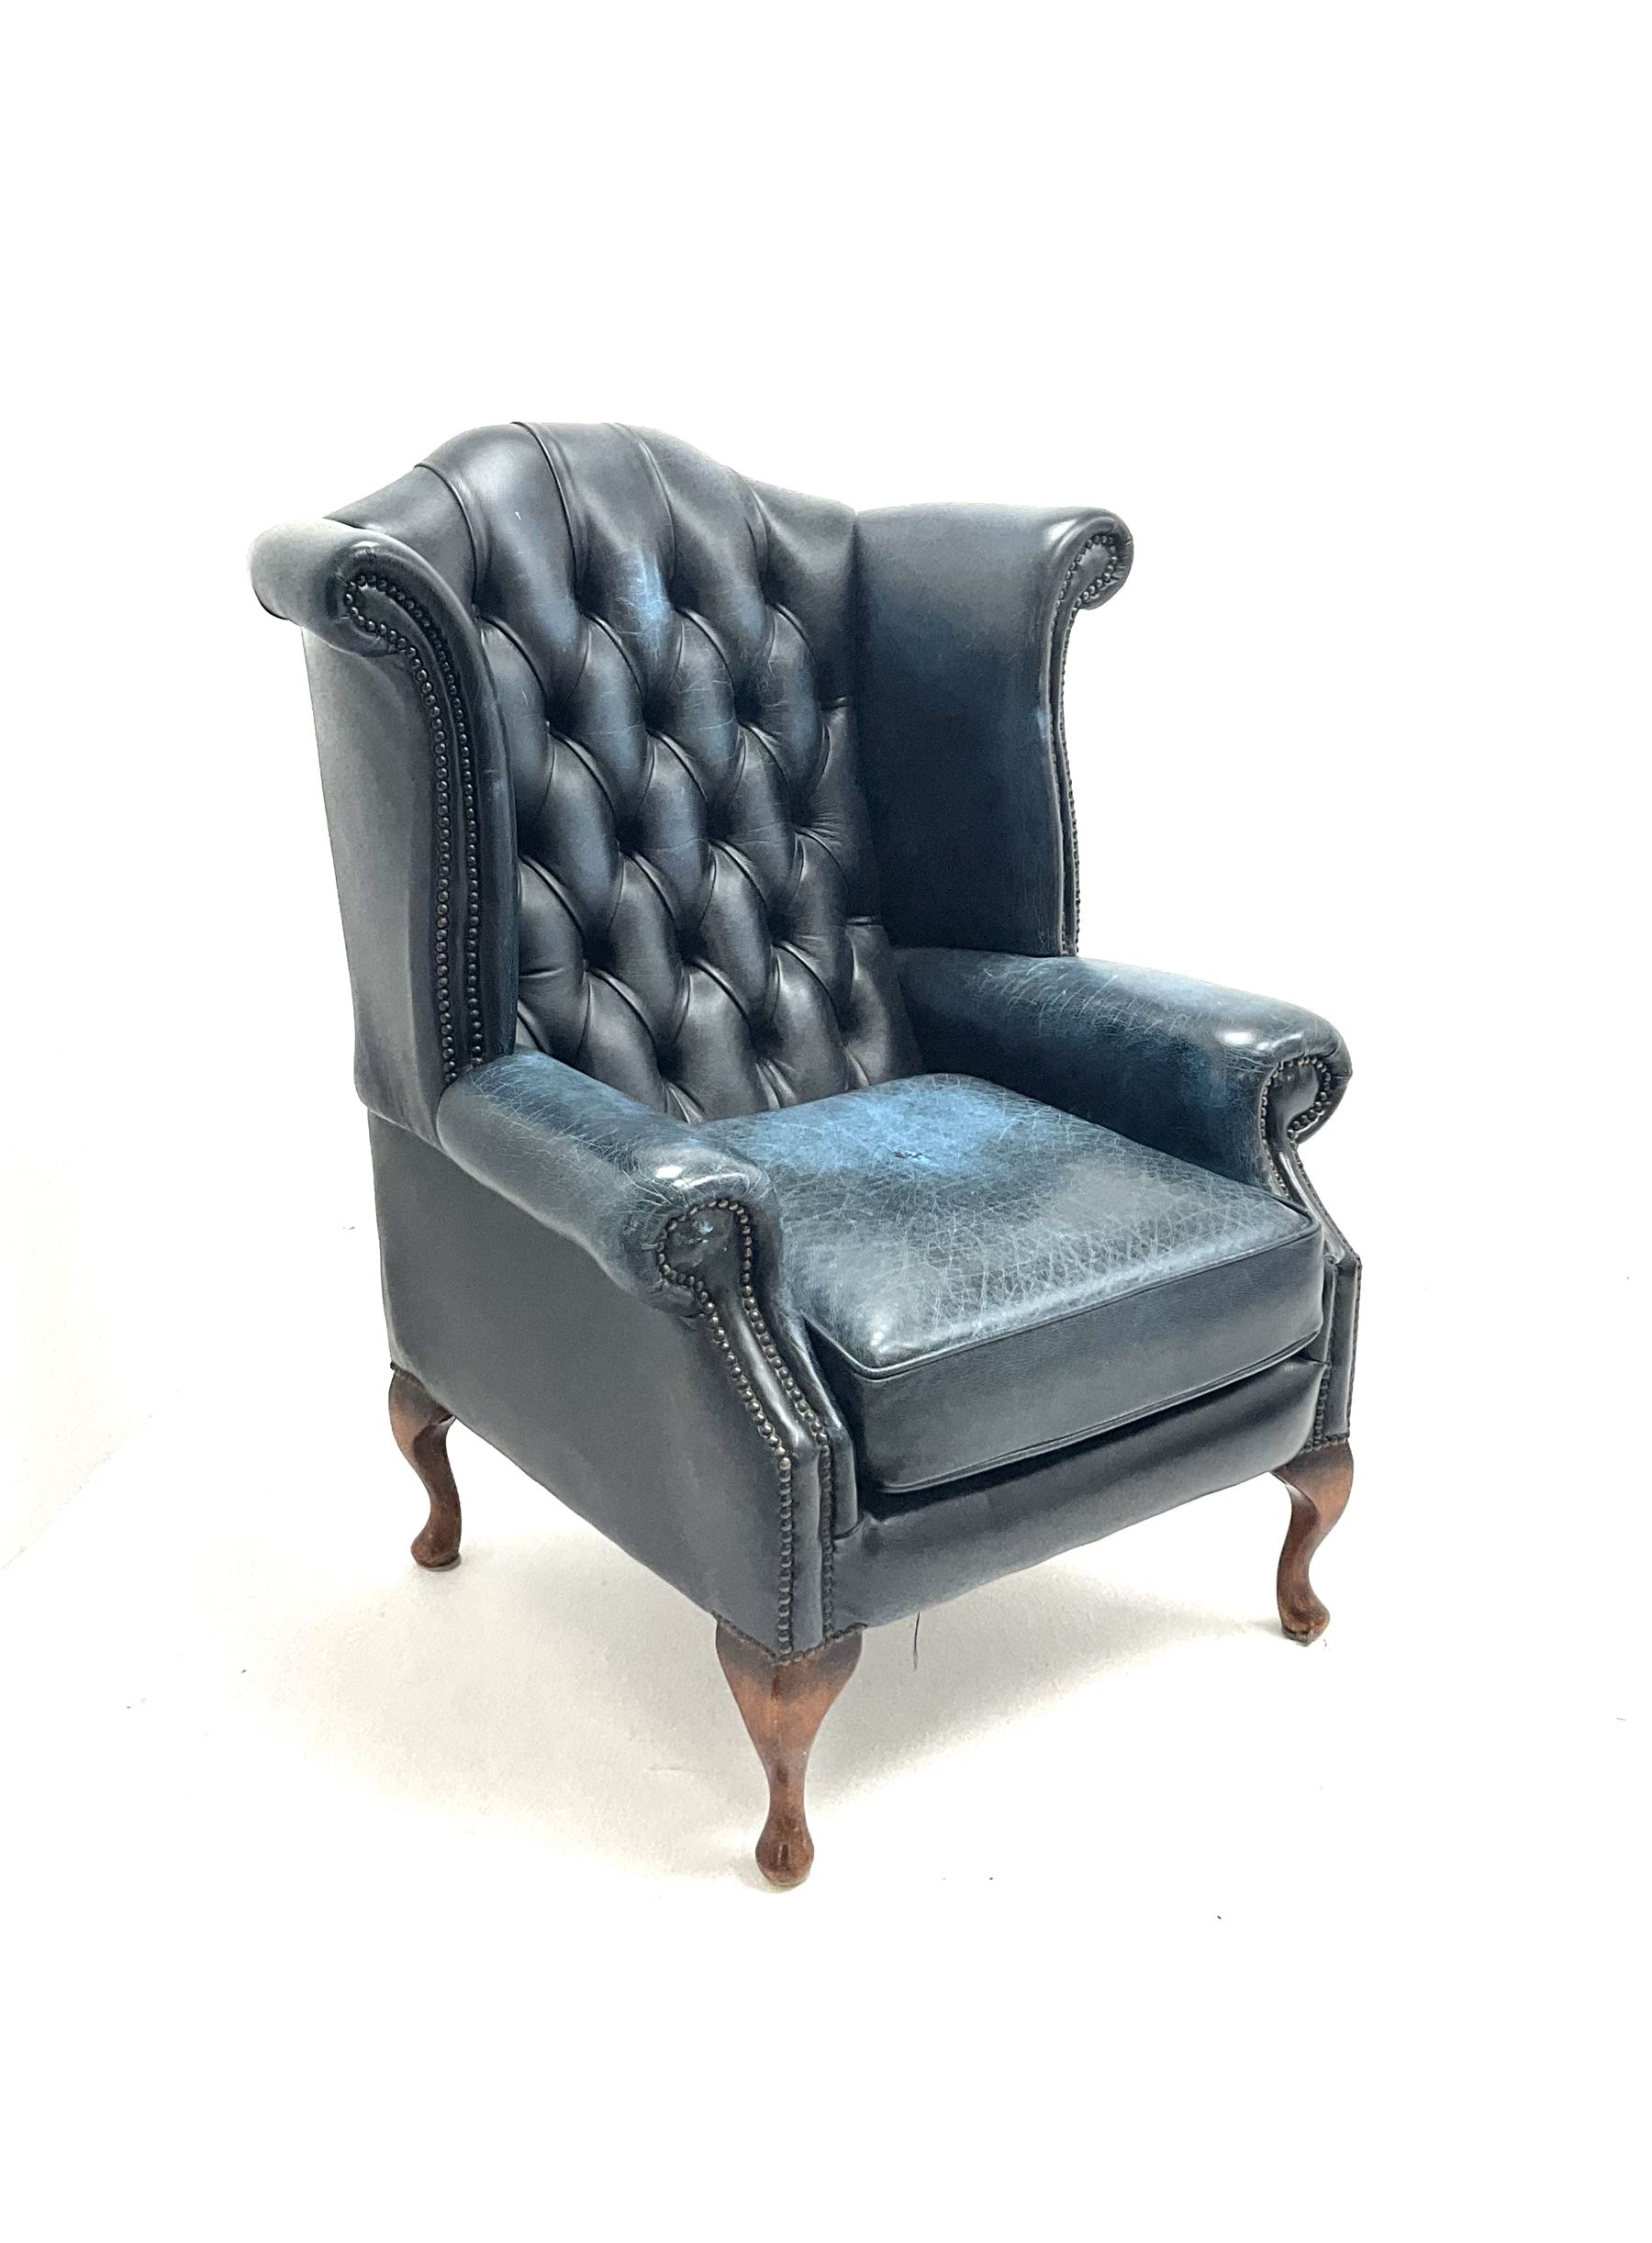 Queen Anne style wing back deep button armchair - Image 2 of 2